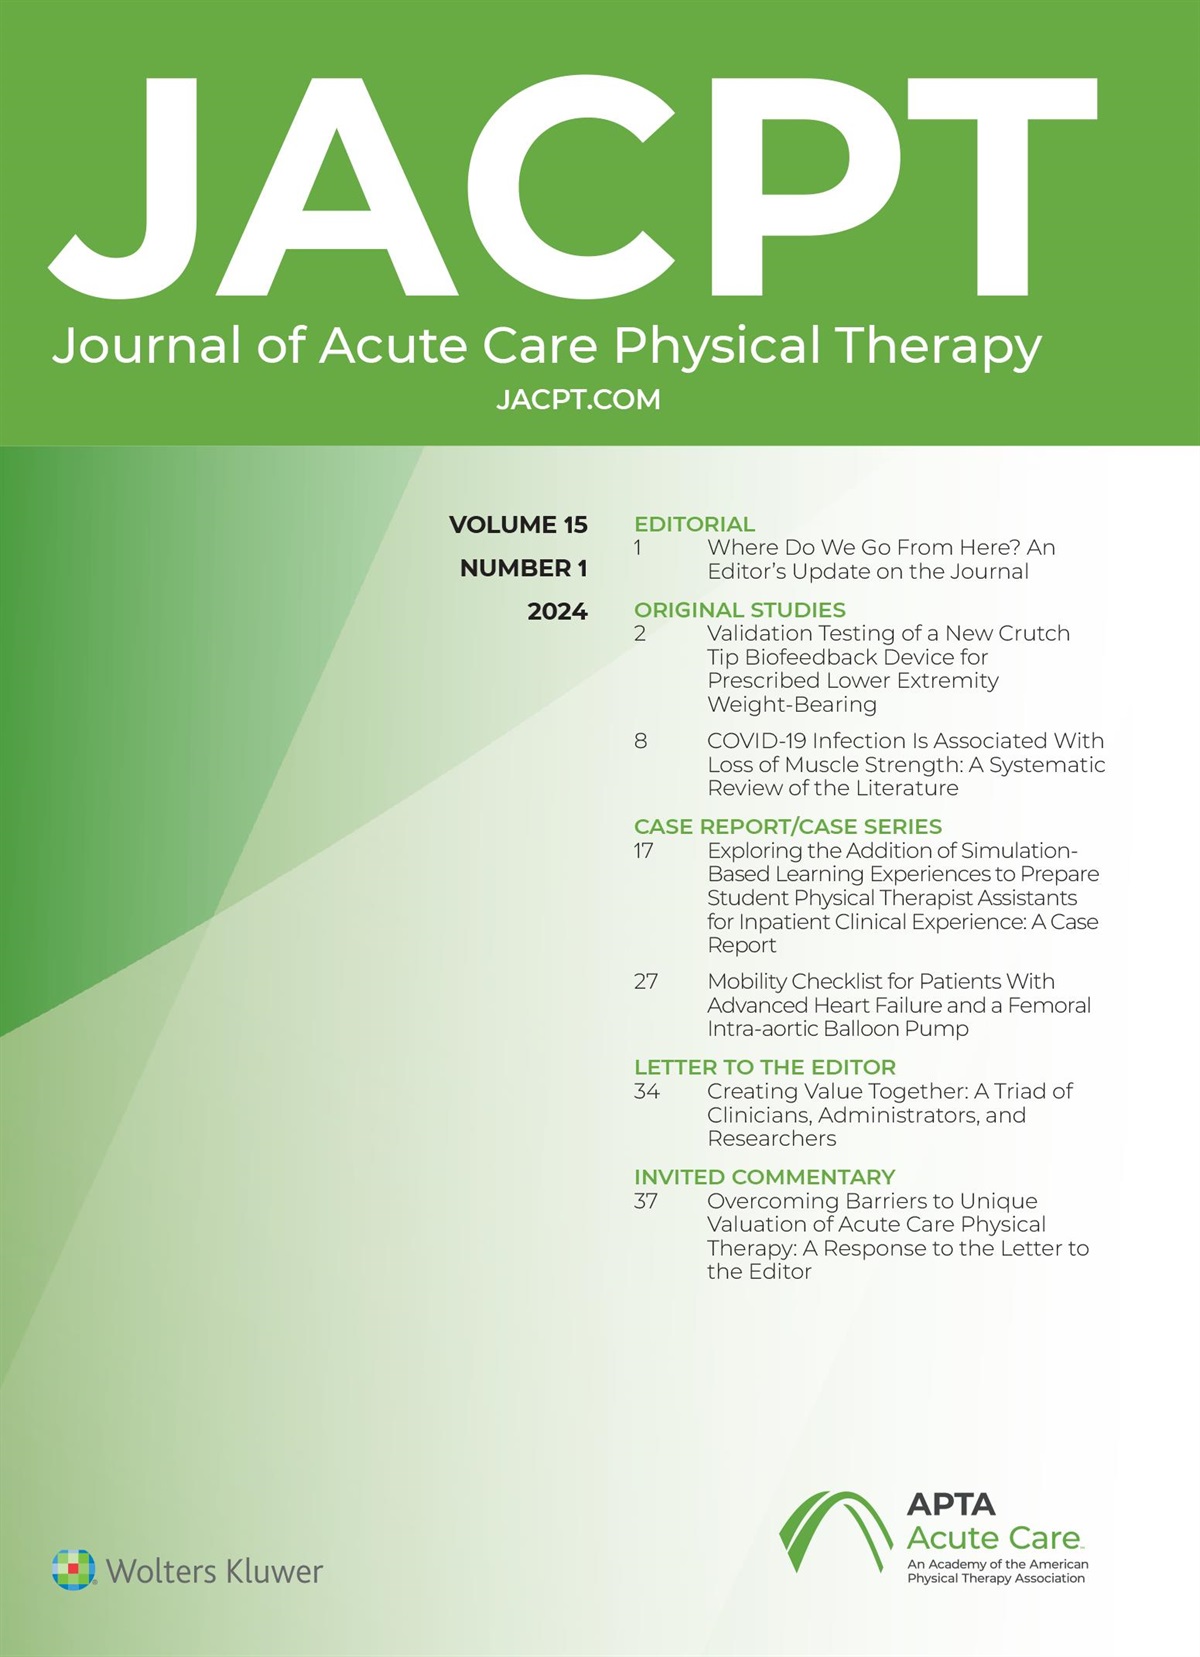 Overcoming Barriers to Unique Valuation of Acute Care Physical Therapy: A Response to the Letter to the Editor